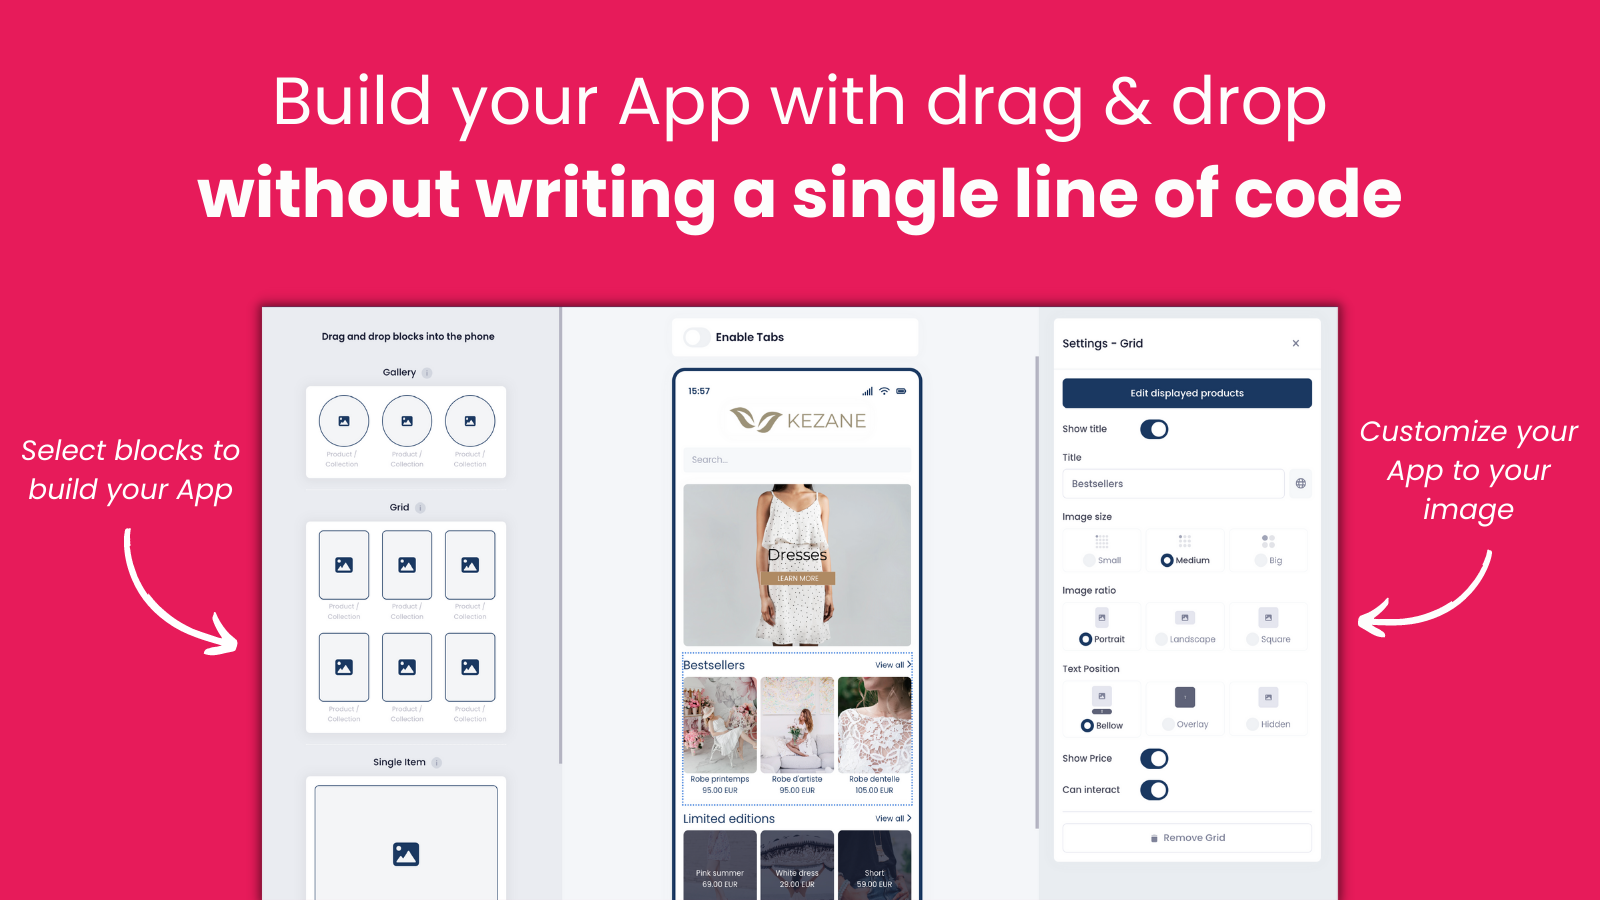 Build your App without writing a single line of code